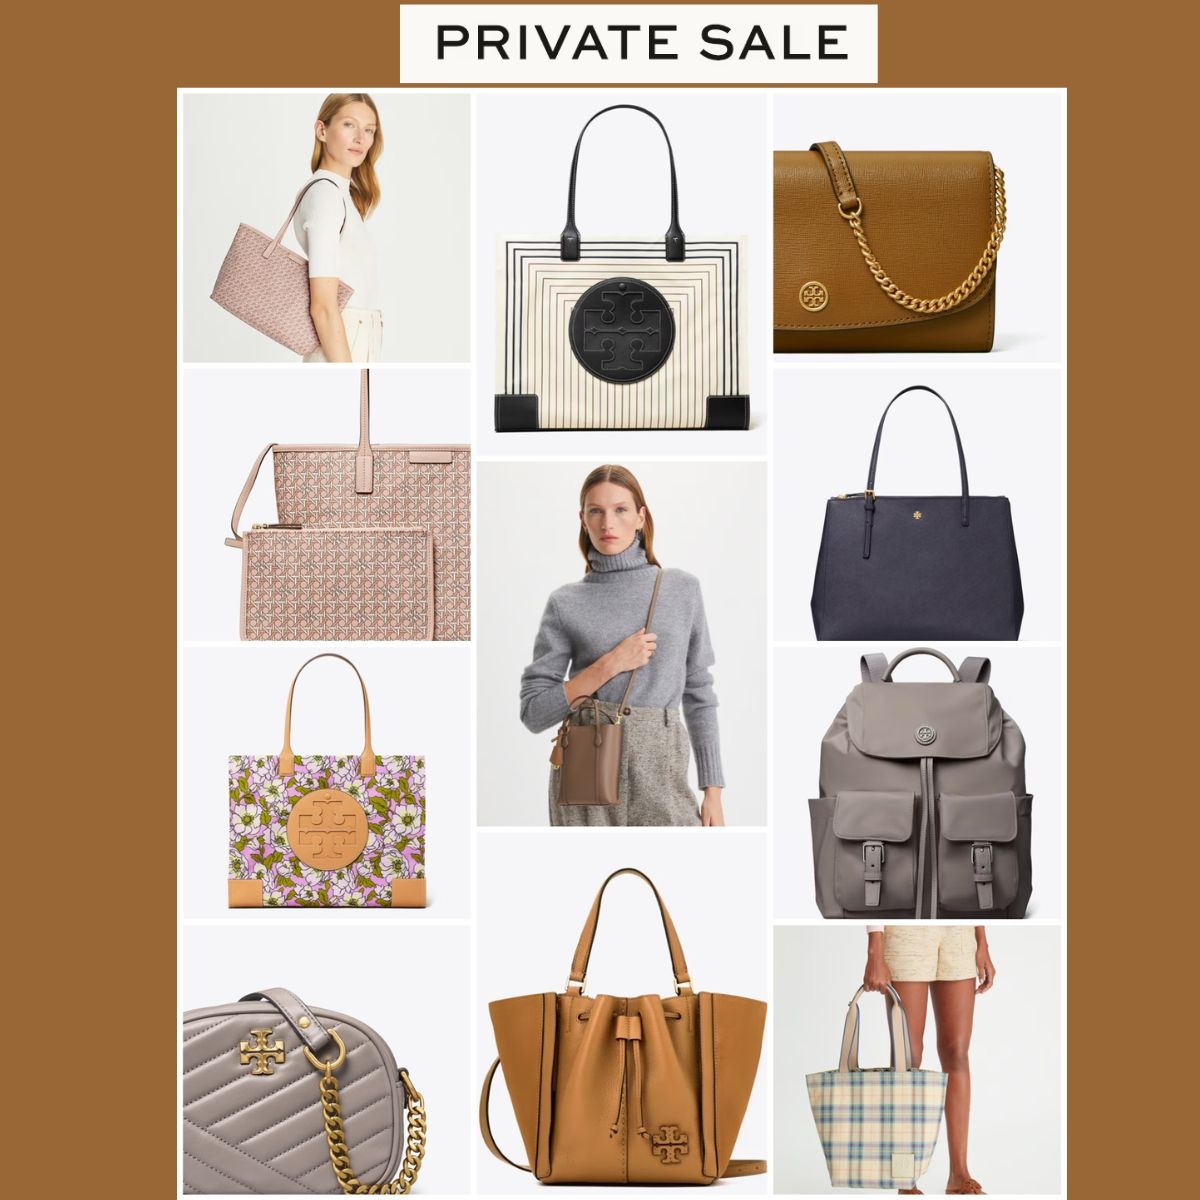 Tory Burch: Save big at the Tory Burch Private Sale